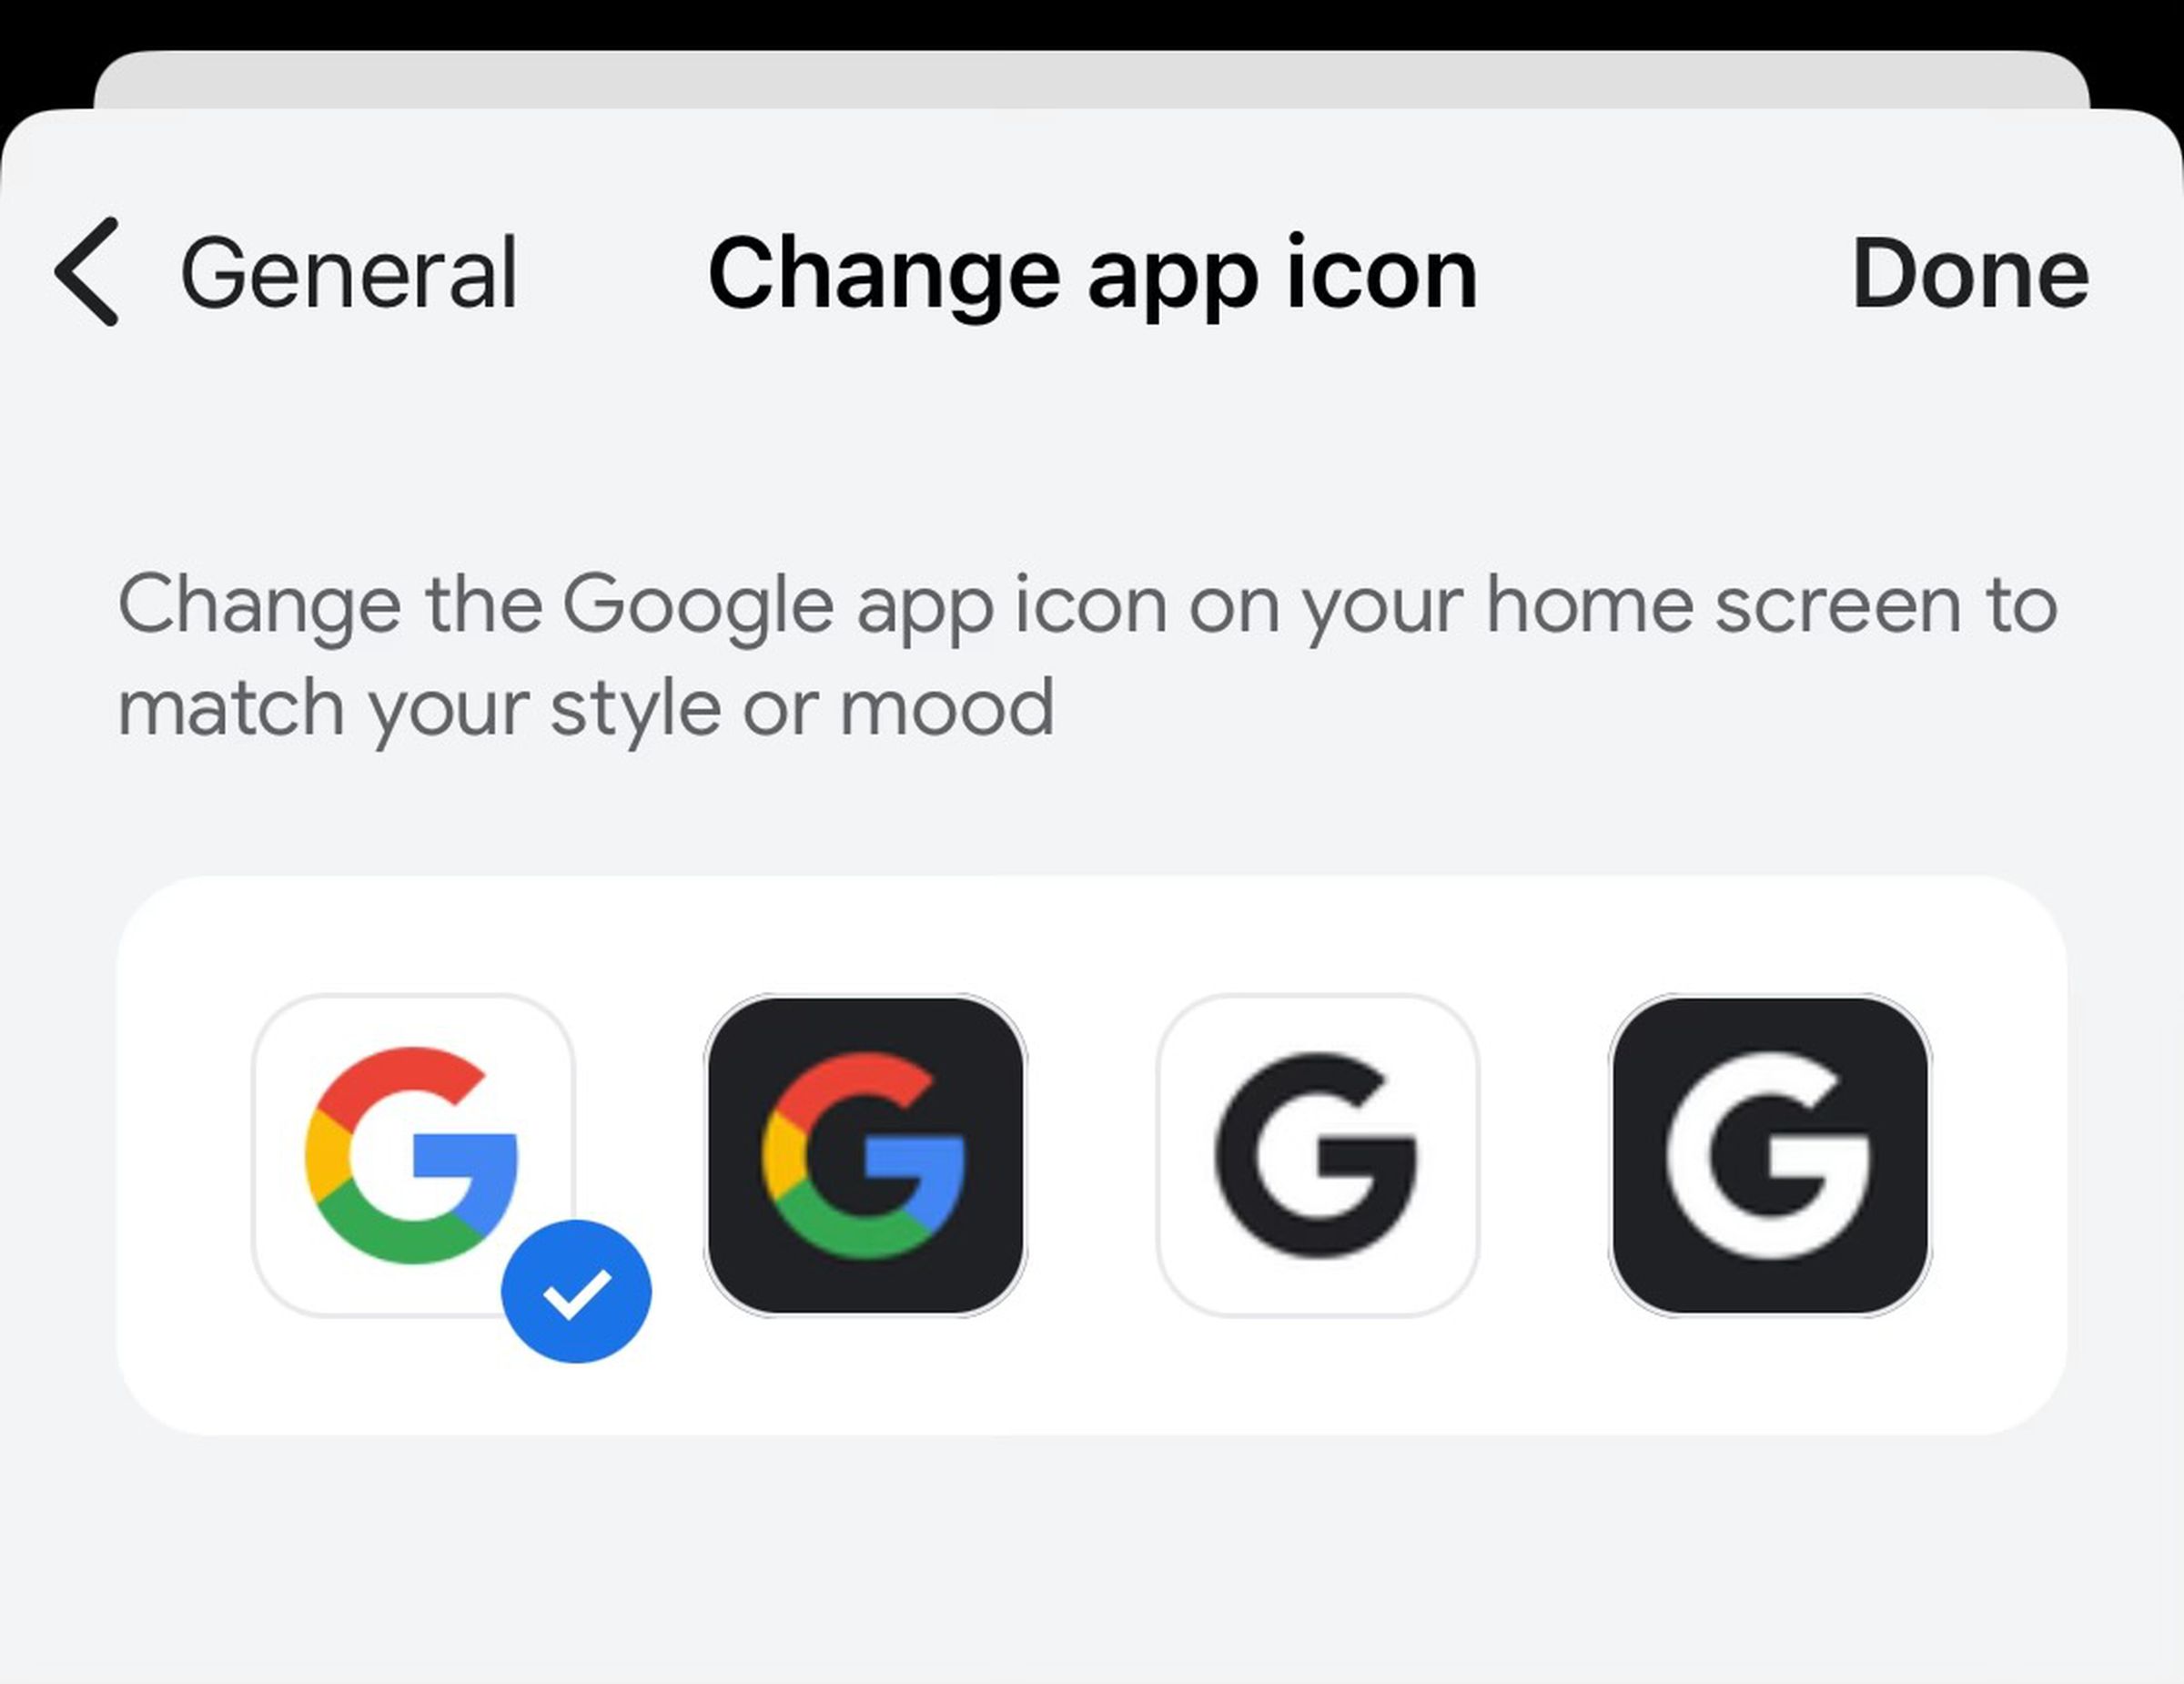 A screenshot featuring the four different app icon options for Google’s iOS app.